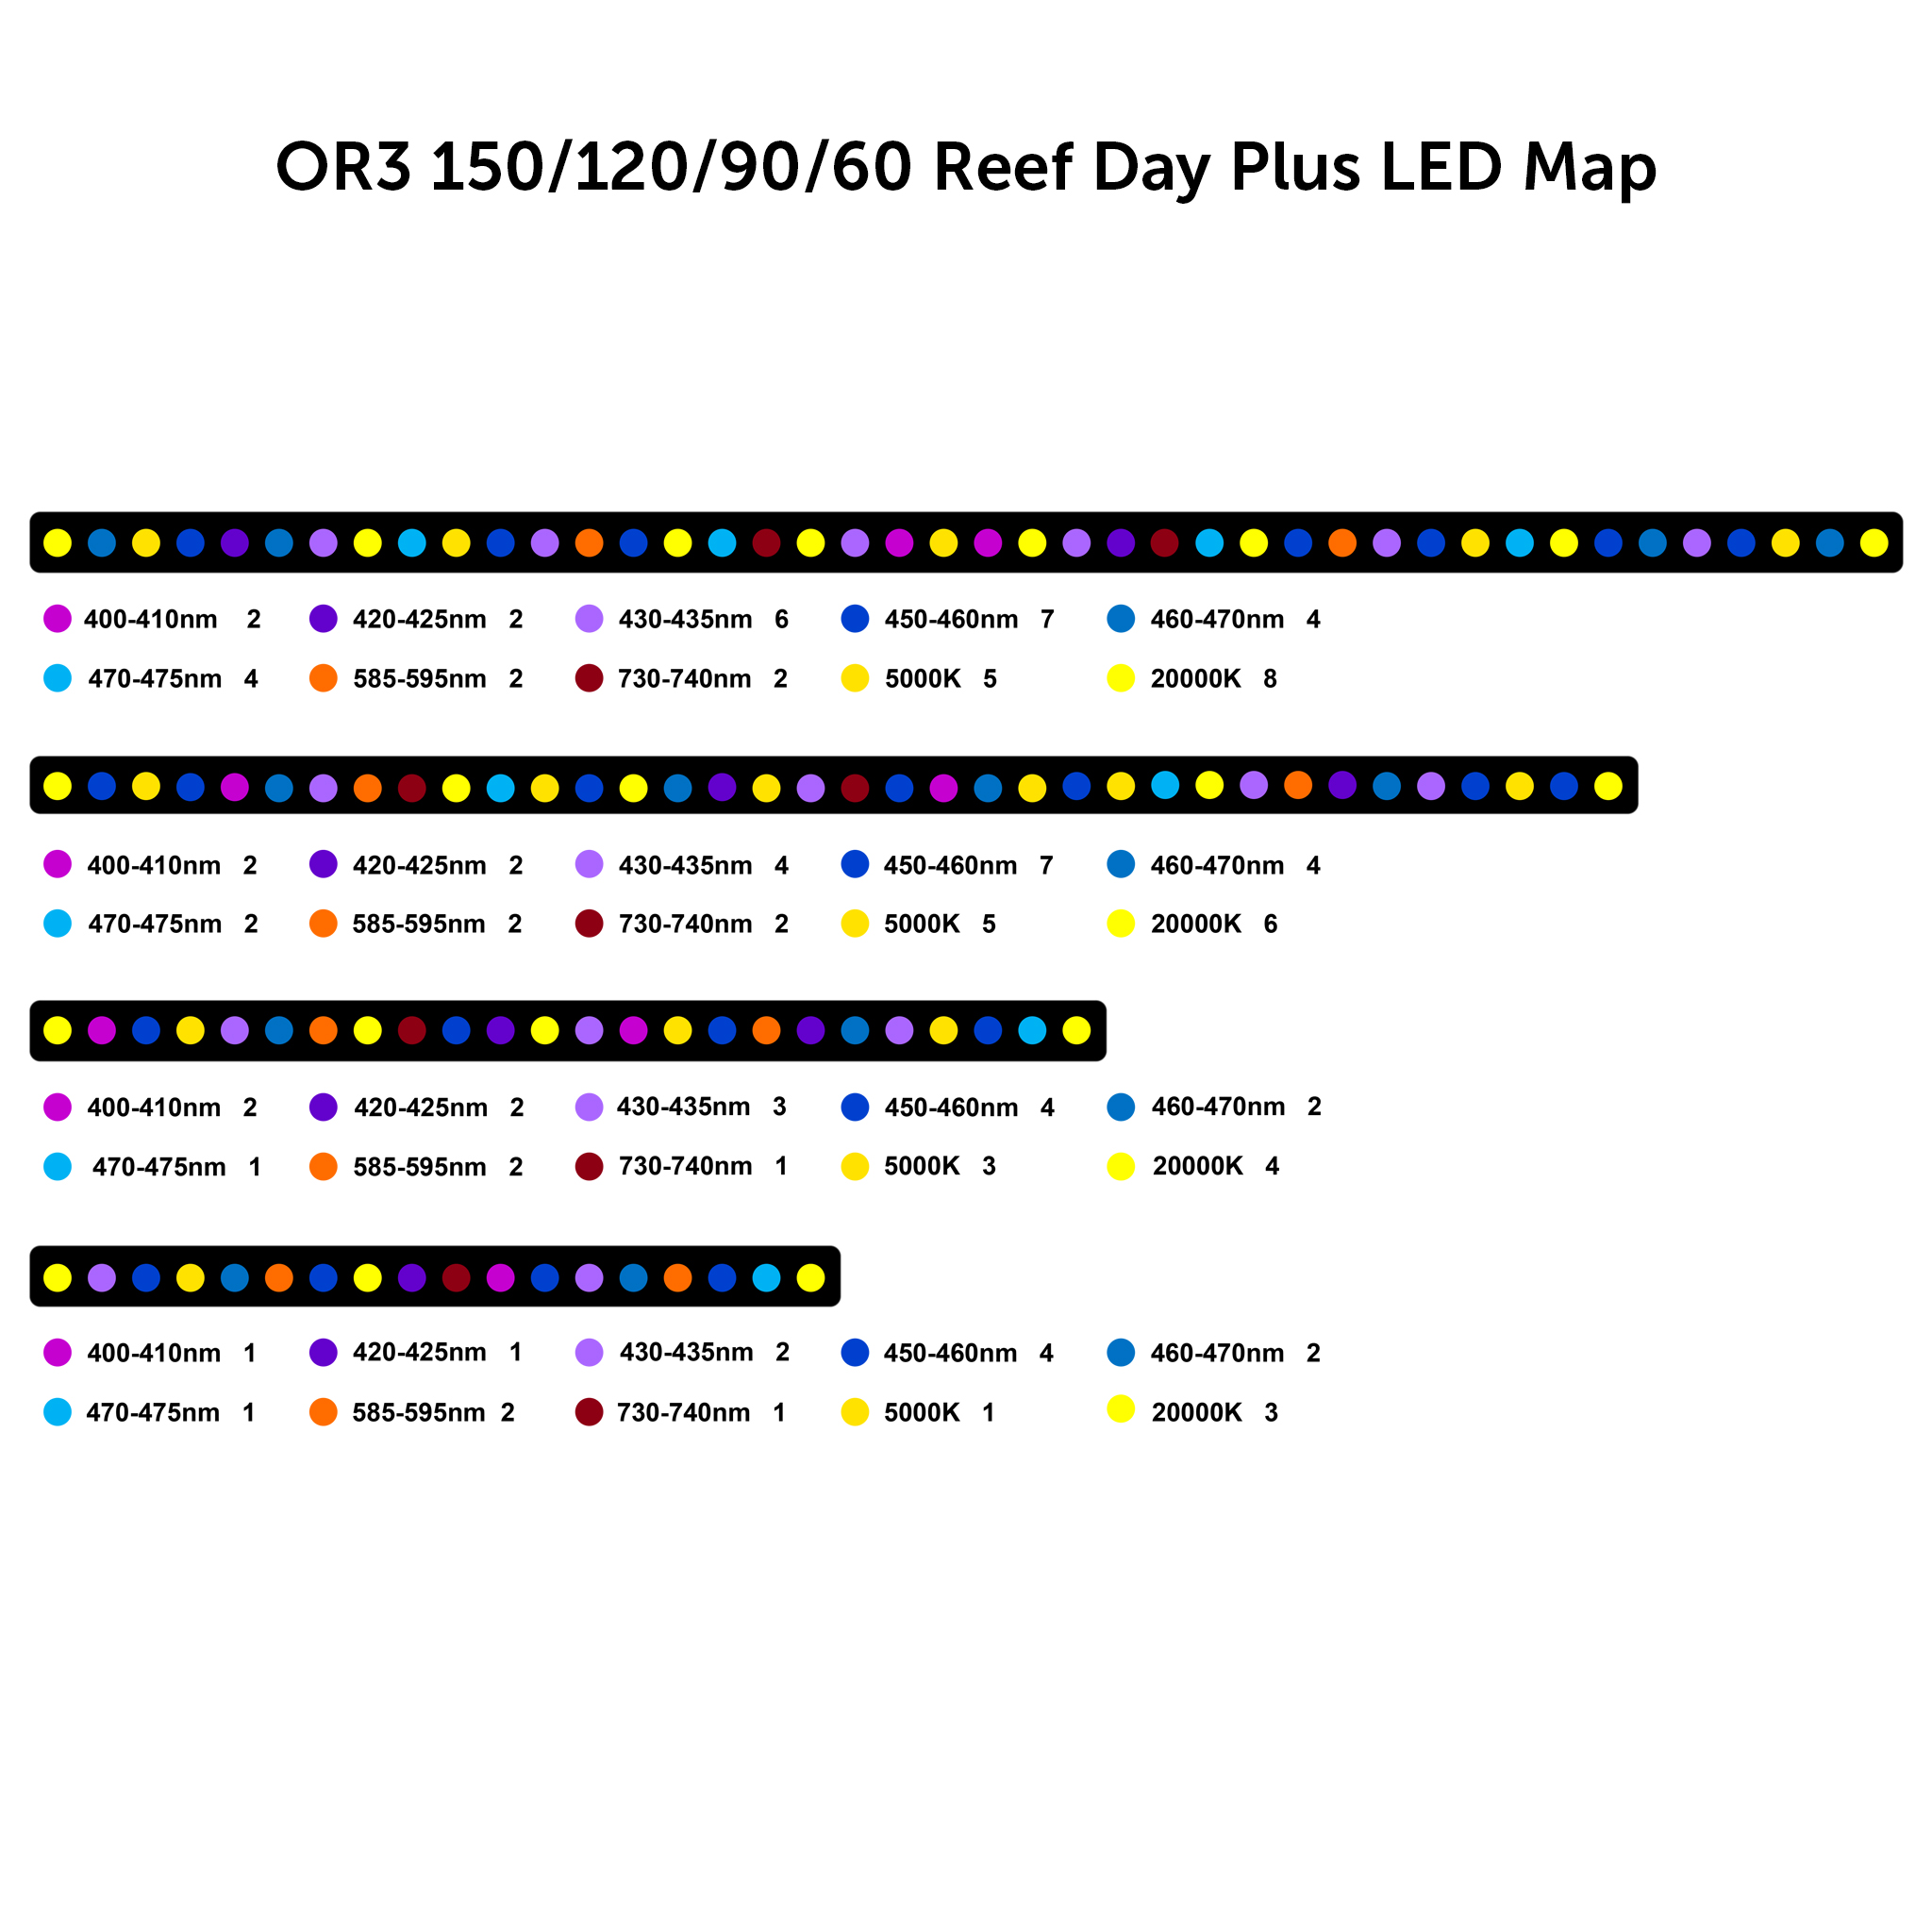 or3-reef-day-plus-led-map